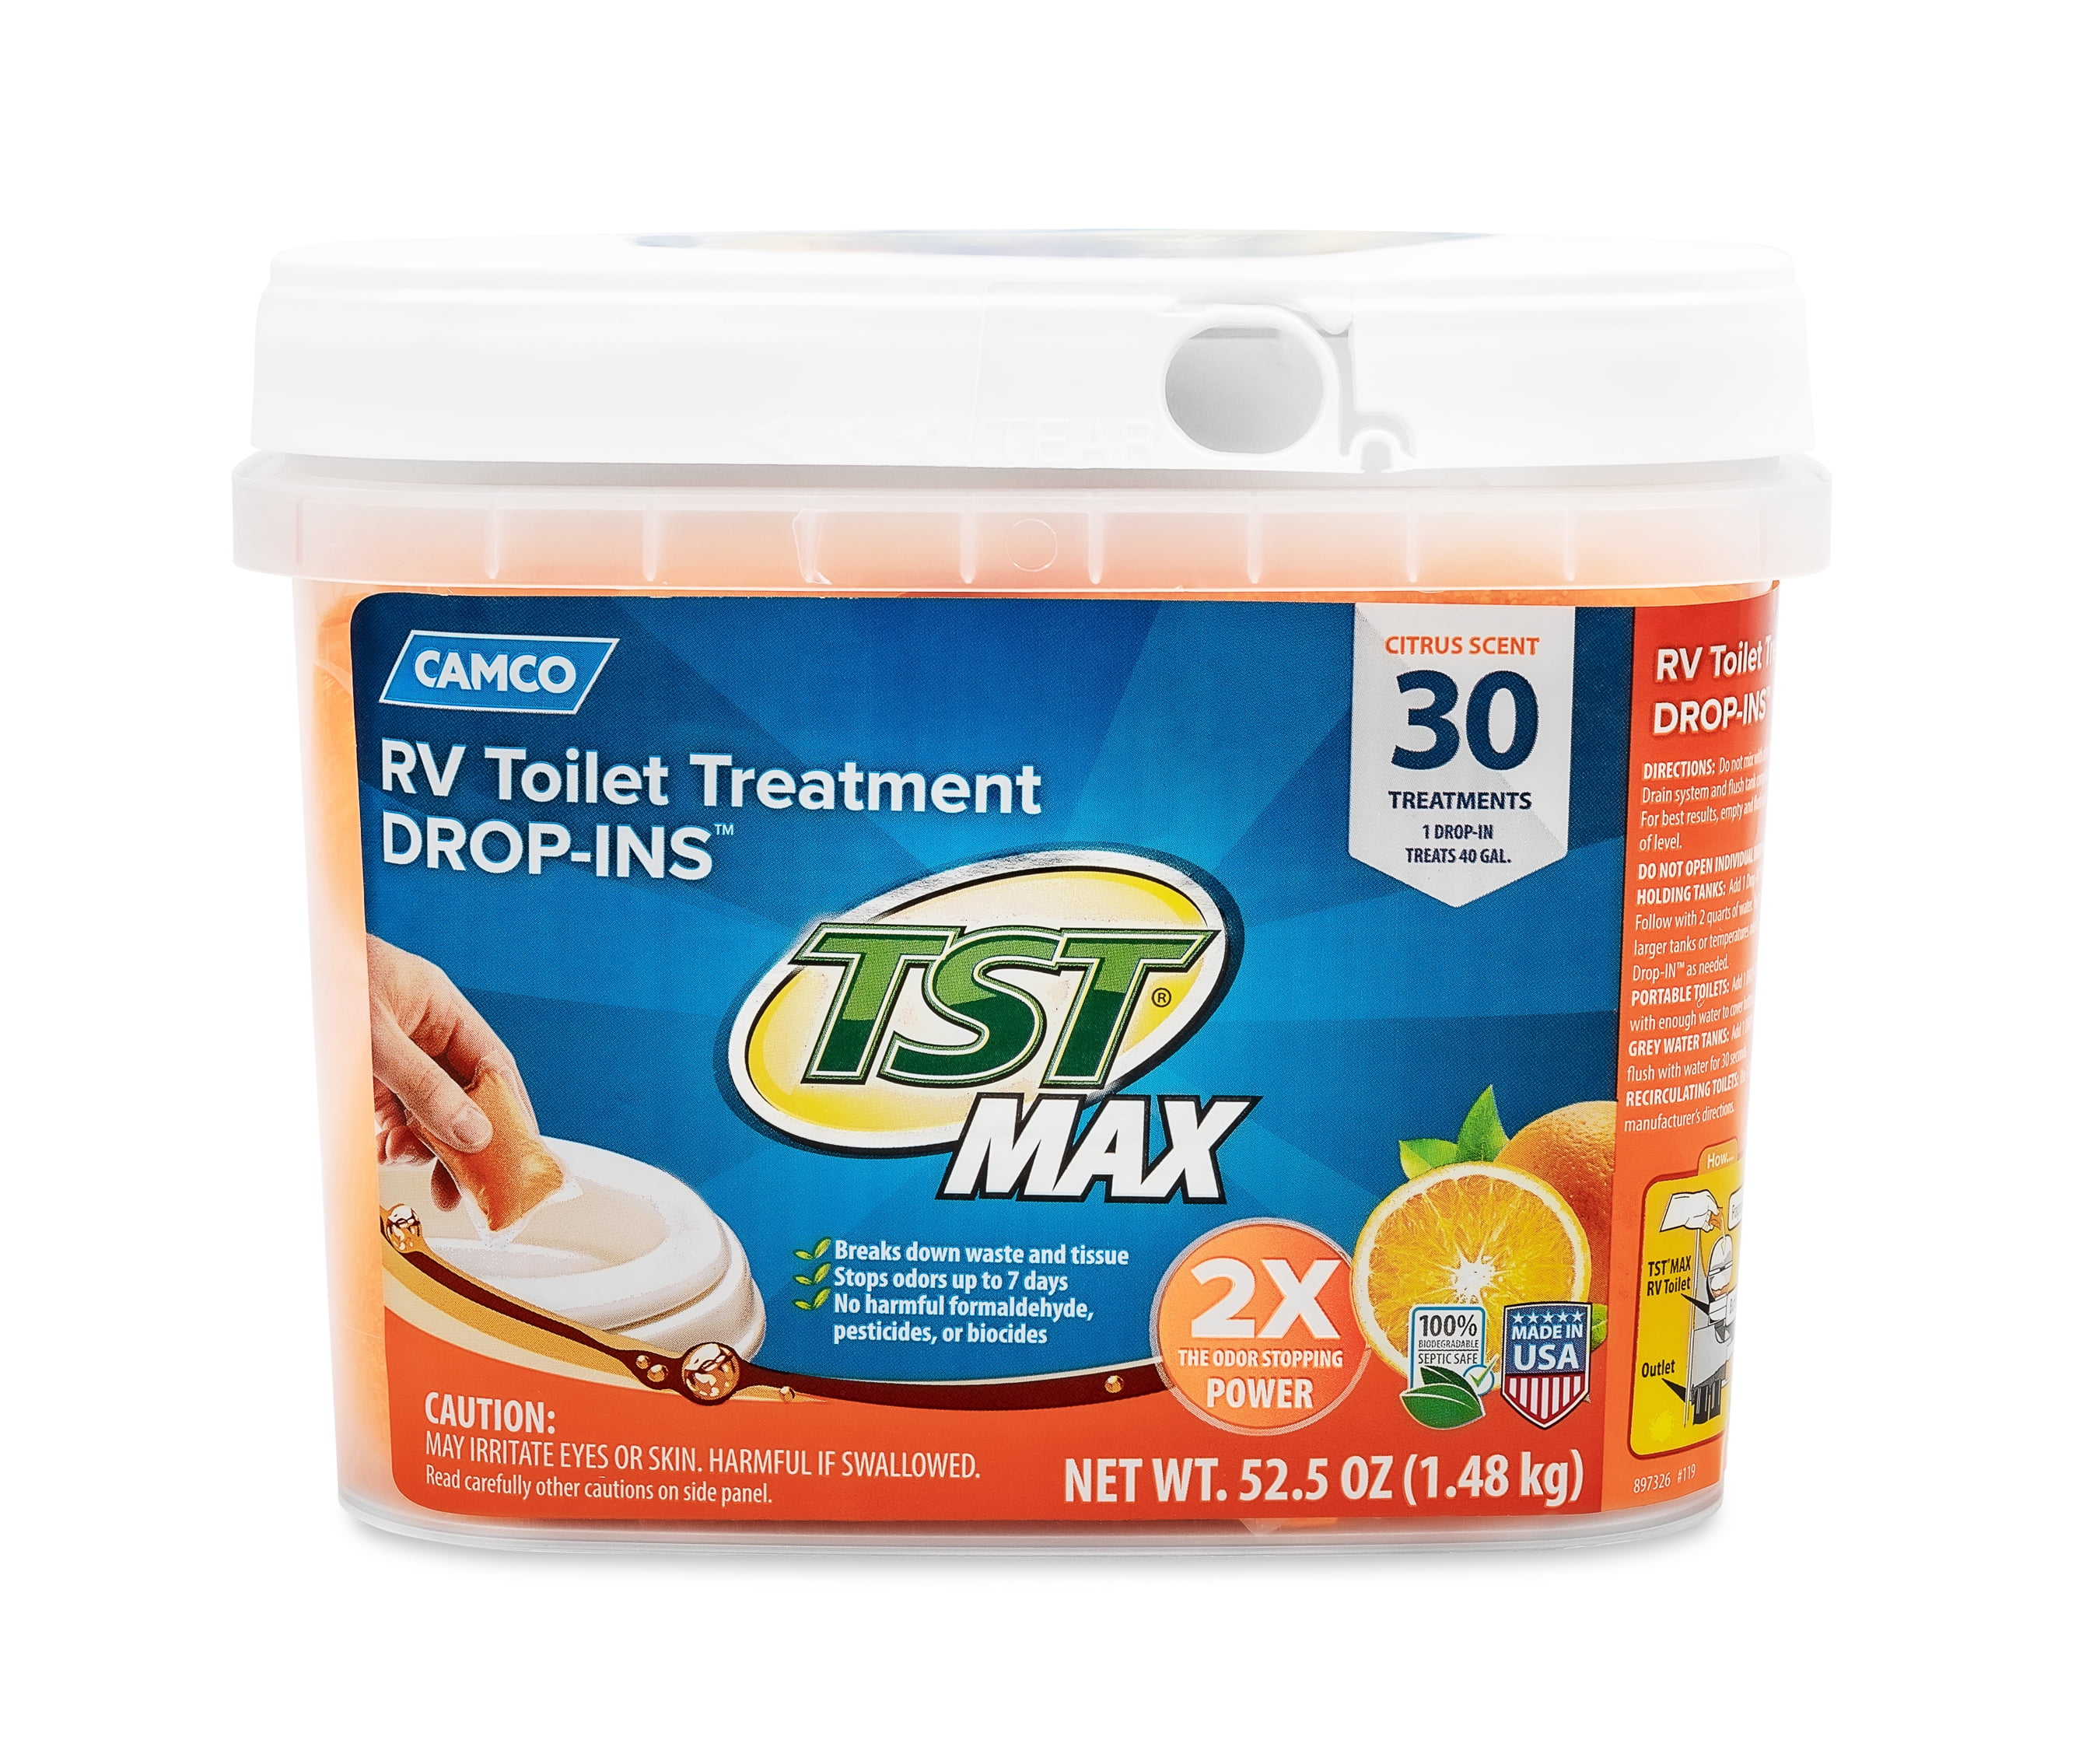 Camco TST MAX RV Toilet Treatment Drop-INs | Features an Ultra-Concentrated Formula, Orange Citrus Scent, is Septic Safe, and is Ideal for RVs, Campers, Travel Trailers, Boats, and More (41183)